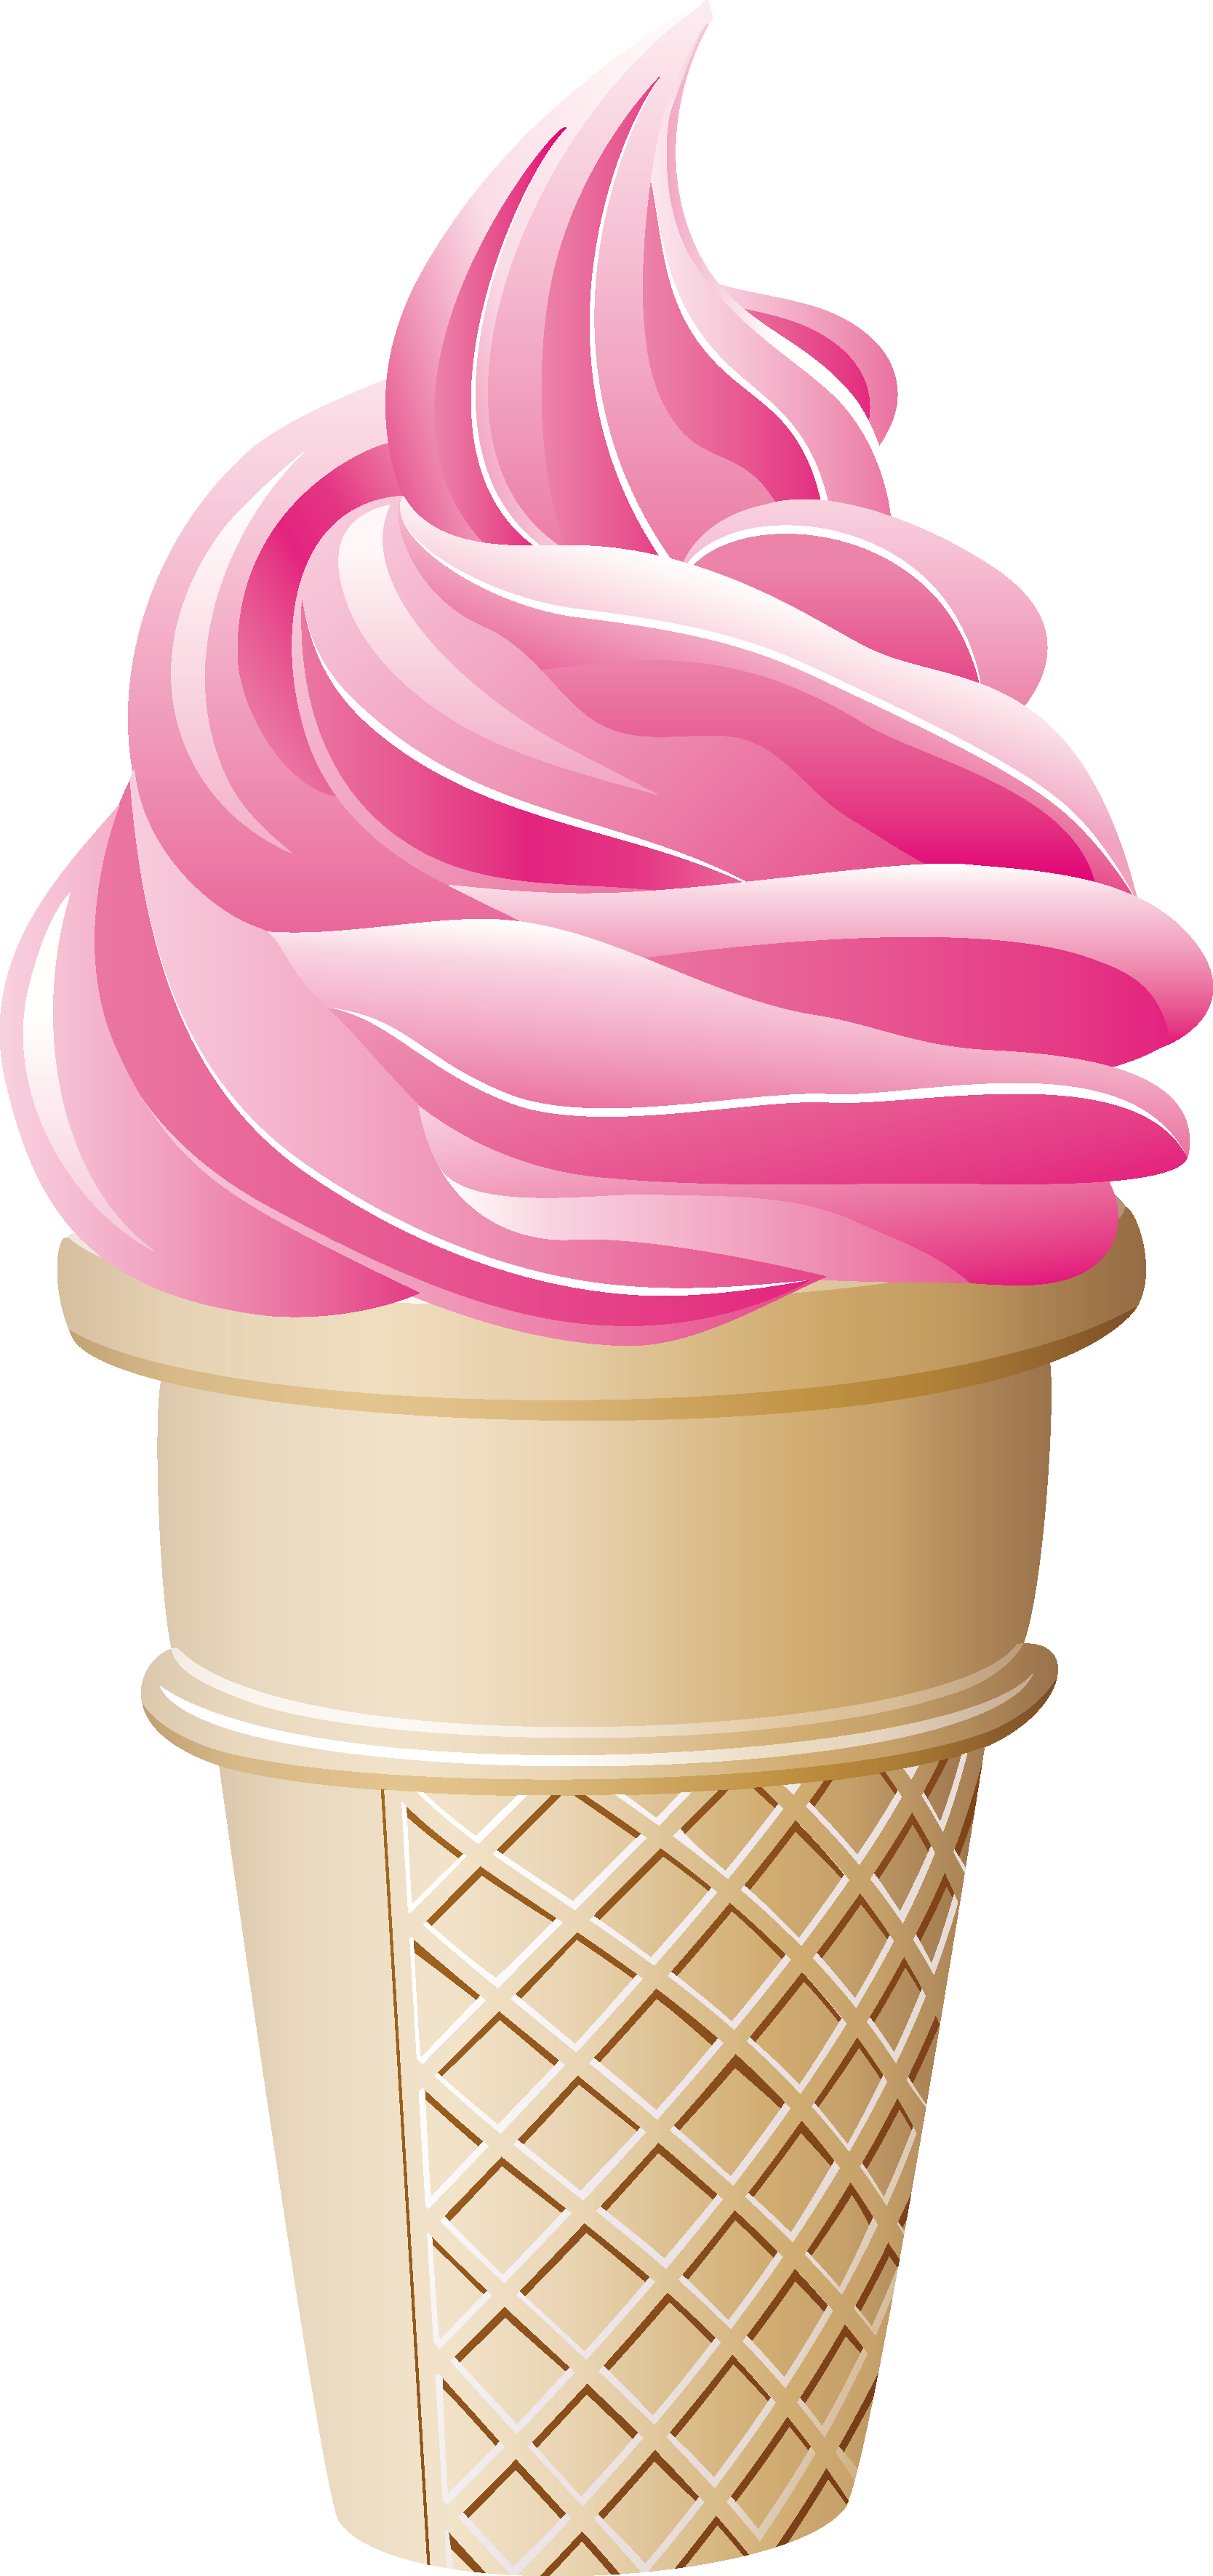 ice cream clipart png - photo #27